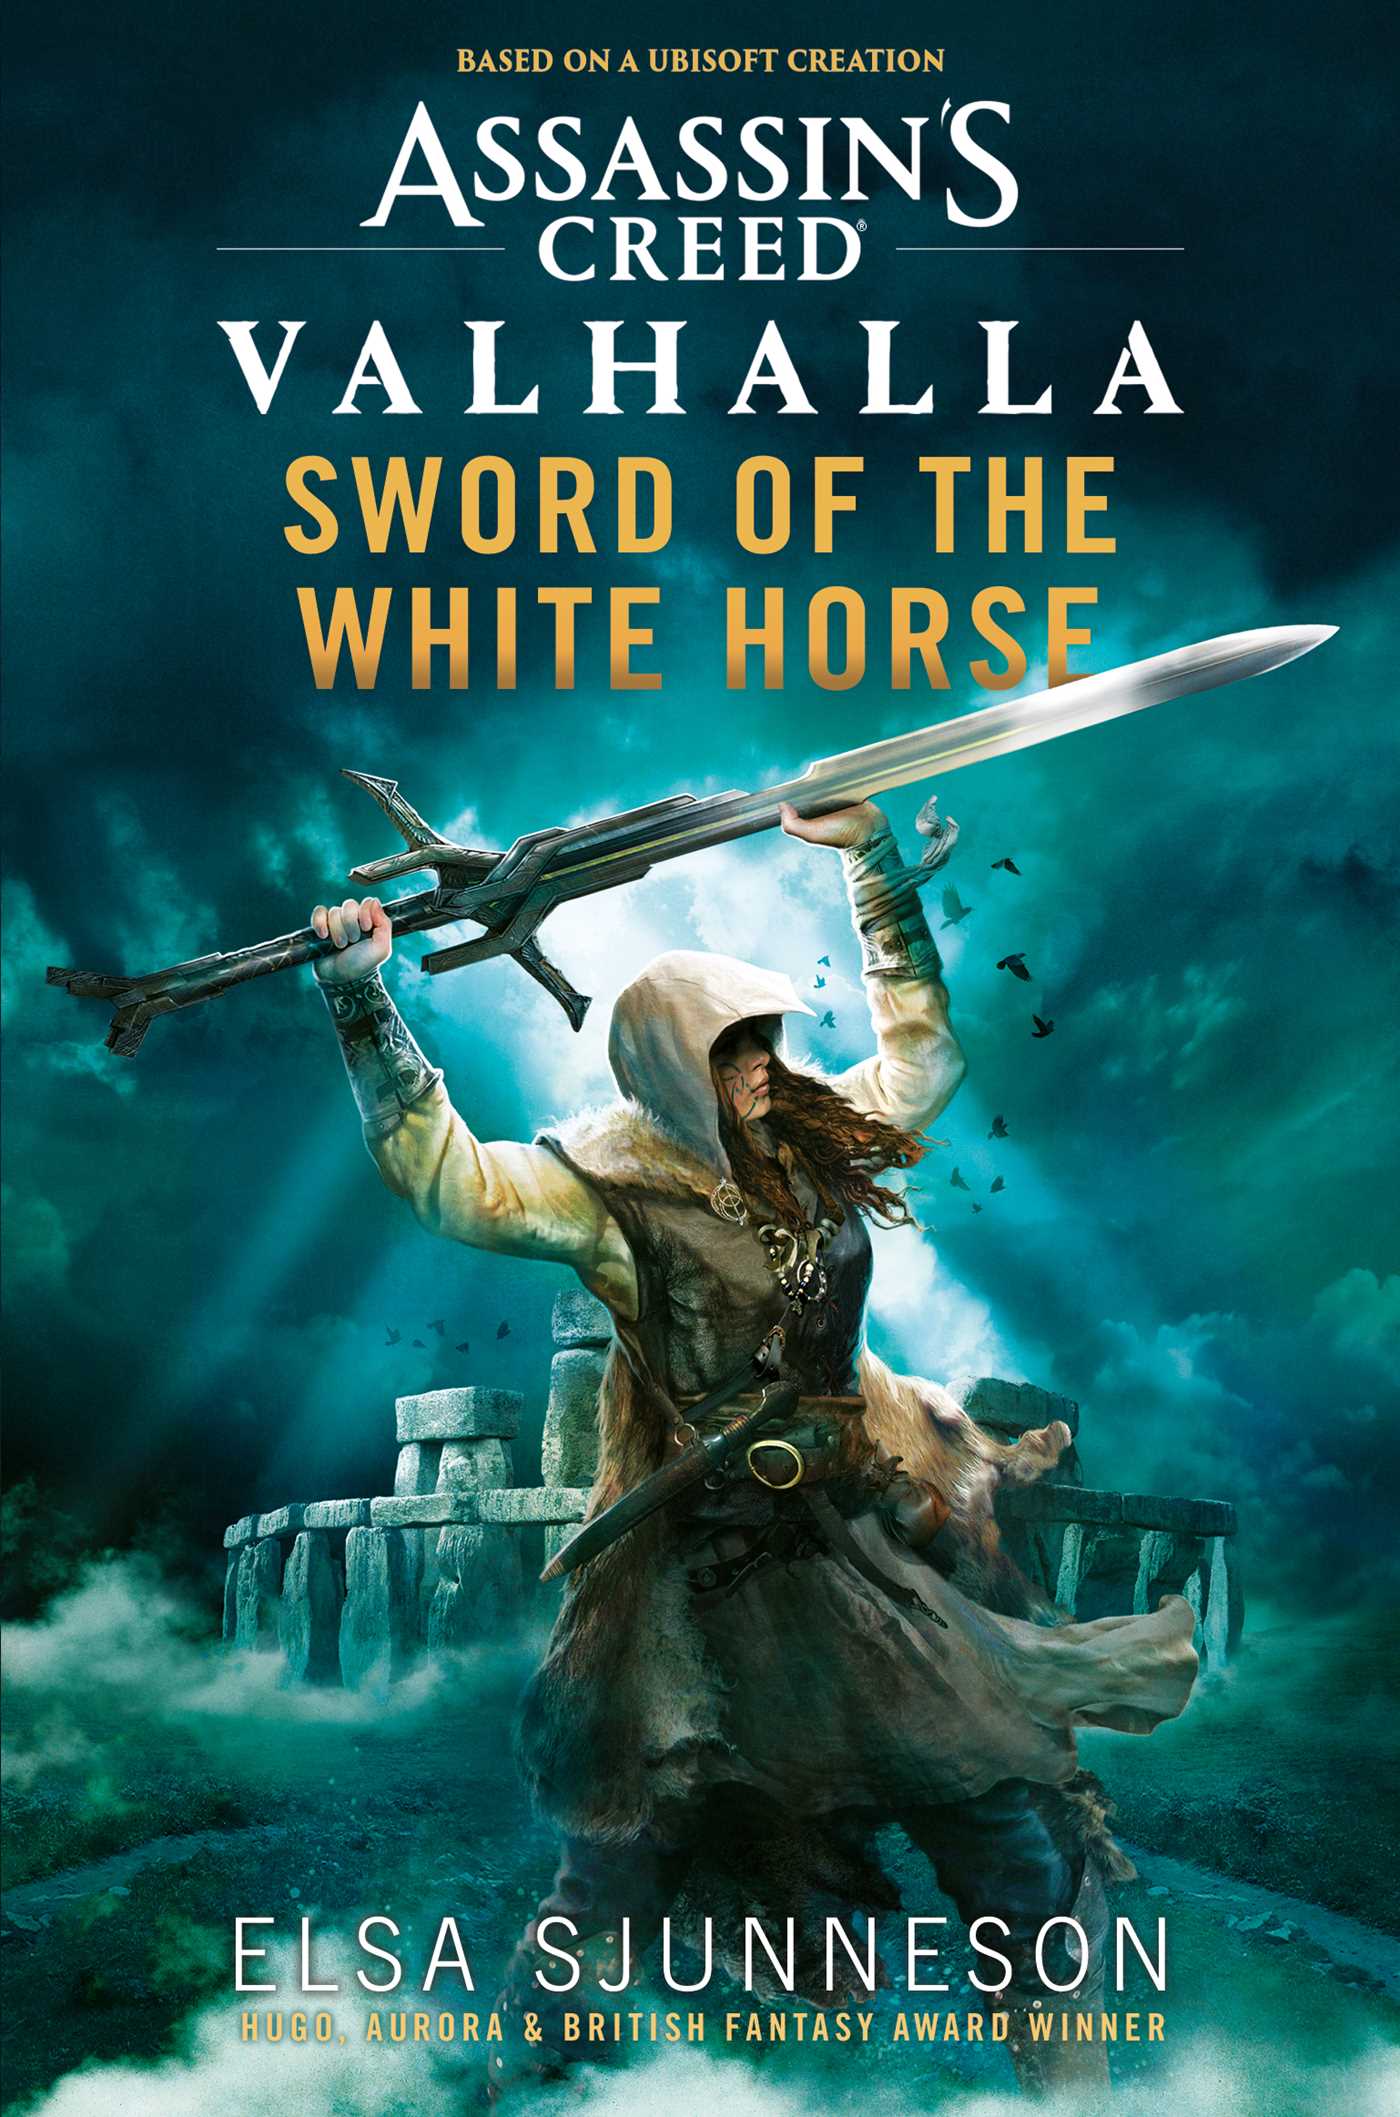 Elsa Sjunneson: Sword of the White Horse (2022, Asmodee Editions)